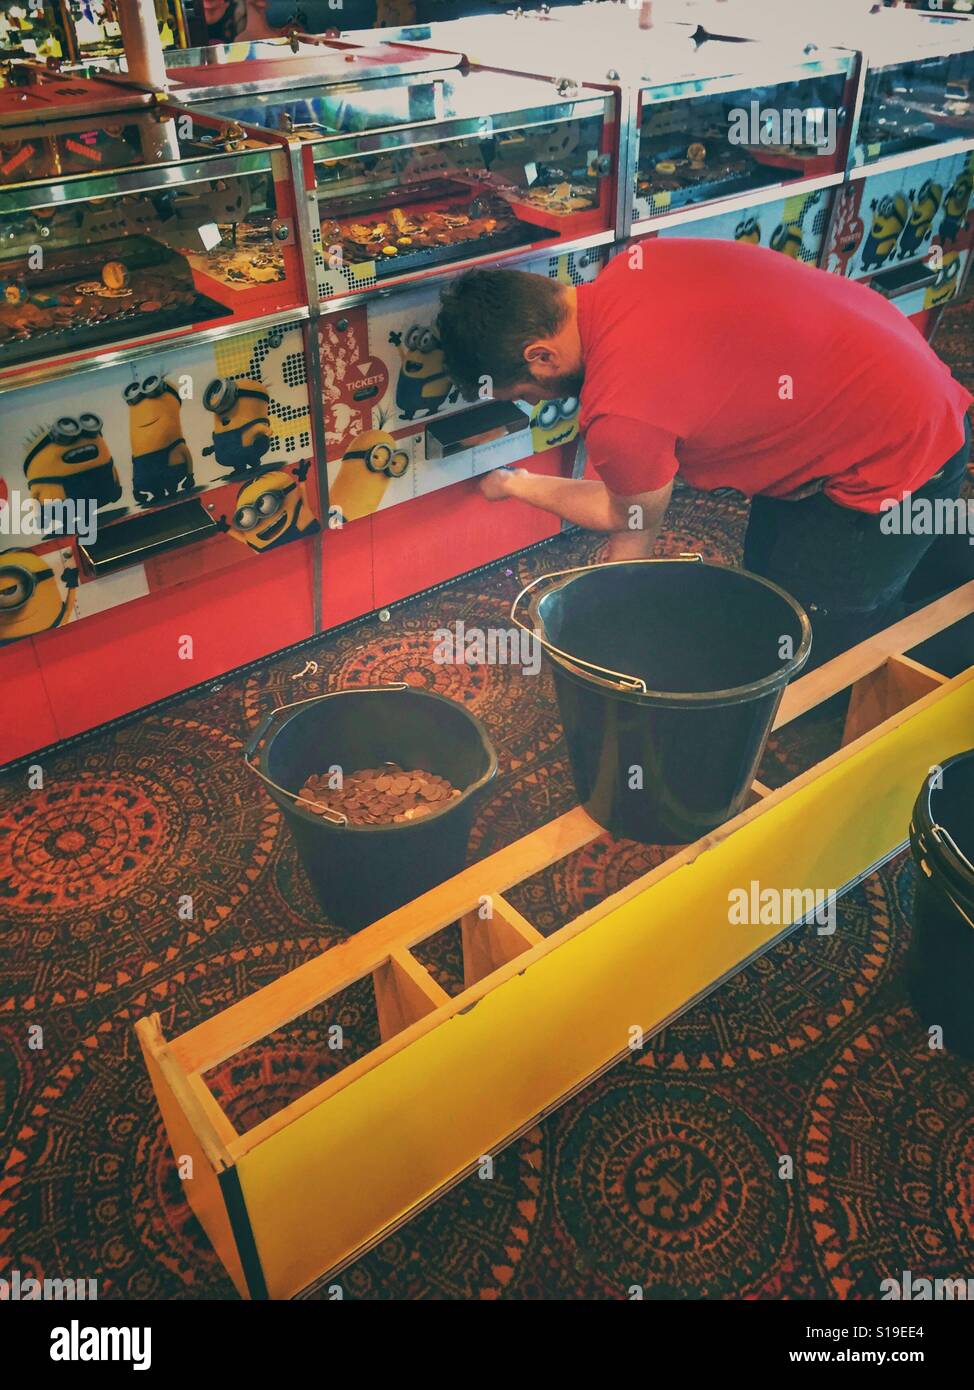 Young man in Games Arcade removing coins from machines Stock Photo